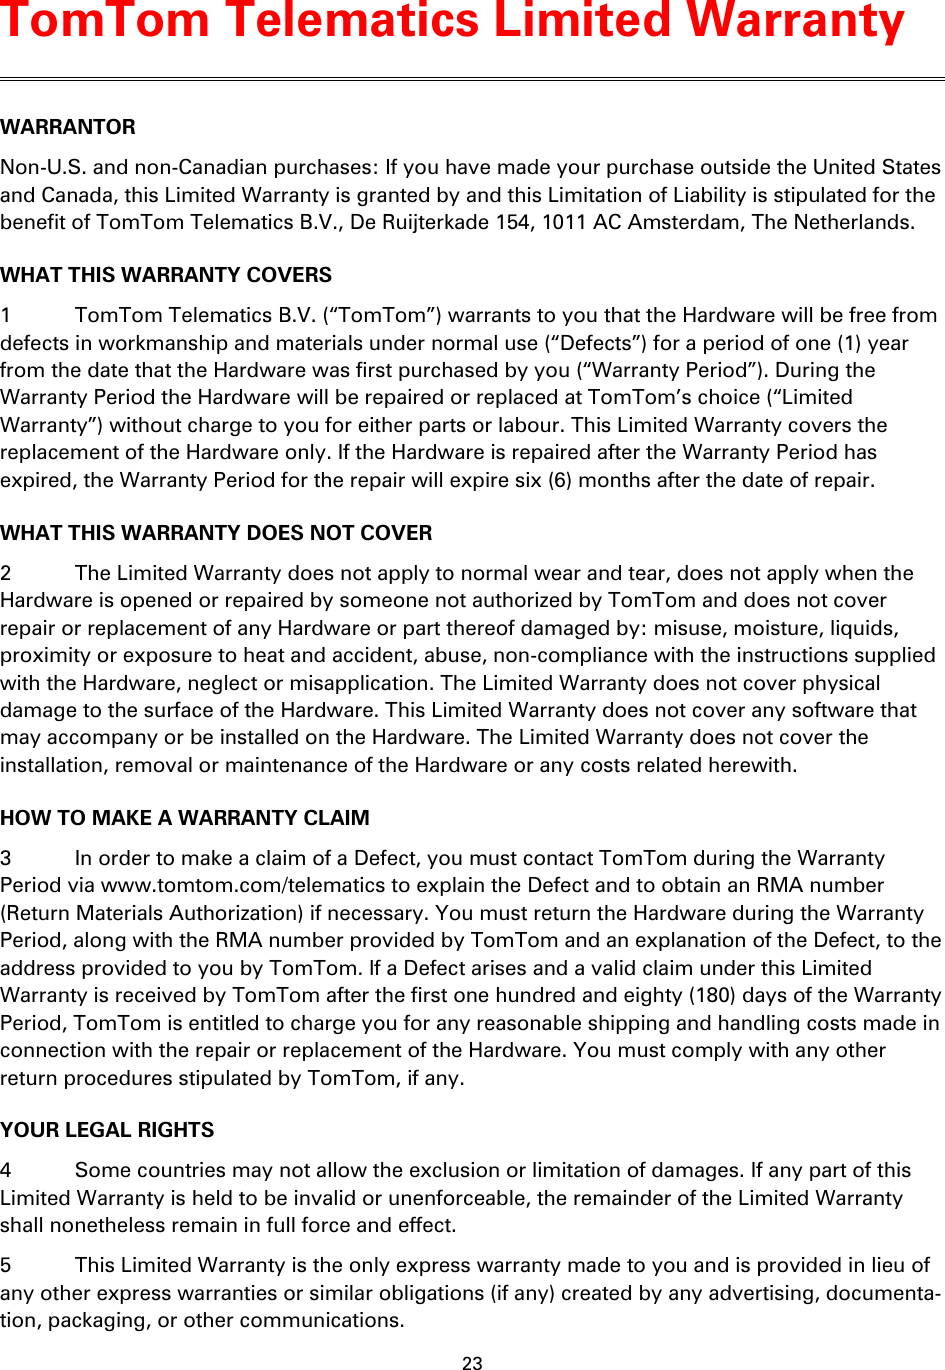 23    WARRANTOR Non-U.S. and non-Canadian purchases: If you have made your purchase outside the United States and Canada, this Limited Warranty is granted by and this Limitation of Liability is stipulated for the benefit of TomTom Telematics B.V., De Ruijterkade 154, 1011 AC Amsterdam, The Netherlands.   WHAT THIS WARRANTY COVERS 1  TomTom Telematics B.V. (“TomTom”) warrants to you that the Hardware will be free from defects in workmanship and materials under normal use (“Defects”) for a period of one (1) year from the date that the Hardware was first purchased by you (“Warranty Period”). During the Warranty Period the Hardware will be repaired or replaced at TomTom’s choice (“Limited Warranty”) without charge to you for either parts or labour. This Limited Warranty covers the replacement of the Hardware only. If the Hardware is repaired after the Warranty Period has expired, the Warranty Period for the repair will expire six (6) months after the date of repair. WHAT THIS WARRANTY DOES NOT COVER 2  The Limited Warranty does not apply to normal wear and tear, does not apply when the Hardware is opened or repaired by someone not authorized by TomTom and does not cover repair or replacement of any Hardware or part thereof damaged by: misuse, moisture, liquids, proximity or exposure to heat and accident, abuse, non-compliance with the instructions supplied with the Hardware, neglect or misapplication. The Limited Warranty does not cover physical damage to the surface of the Hardware. This Limited Warranty does not cover any software that may accompany or be installed on the Hardware. The Limited Warranty does not cover the installation, removal or maintenance of the Hardware or any costs related herewith. HOW TO MAKE A WARRANTY CLAIM 3  In order to make a claim of a Defect, you must contact TomTom during the Warranty Period via www.tomtom.com/telematics to explain the Defect and to obtain an RMA number (Return Materials Authorization) if necessary. You must return the Hardware during the Warranty Period, along with the RMA number provided by TomTom and an explanation of the Defect, to the address provided to you by TomTom. If a Defect arises and a valid claim under this Limited Warranty is received by TomTom after the first one hundred and eighty (180) days of the Warranty Period, TomTom is entitled to charge you for any reasonable shipping and handling costs made in connection with the repair or replacement of the Hardware. You must comply with any other return procedures stipulated by TomTom, if any. YOUR LEGAL RIGHTS 4  Some countries may not allow the exclusion or limitation of damages. If any part of this Limited Warranty is held to be invalid or unenforceable, the remainder of the Limited Warranty shall nonetheless remain in full force and effect. 5  This Limited Warranty is the only express warranty made to you and is provided in lieu of any other express warranties or similar obligations (if any) created by any advertising, documenta-tion, packaging, or other communications. TomTom Telematics Limited Warranty 